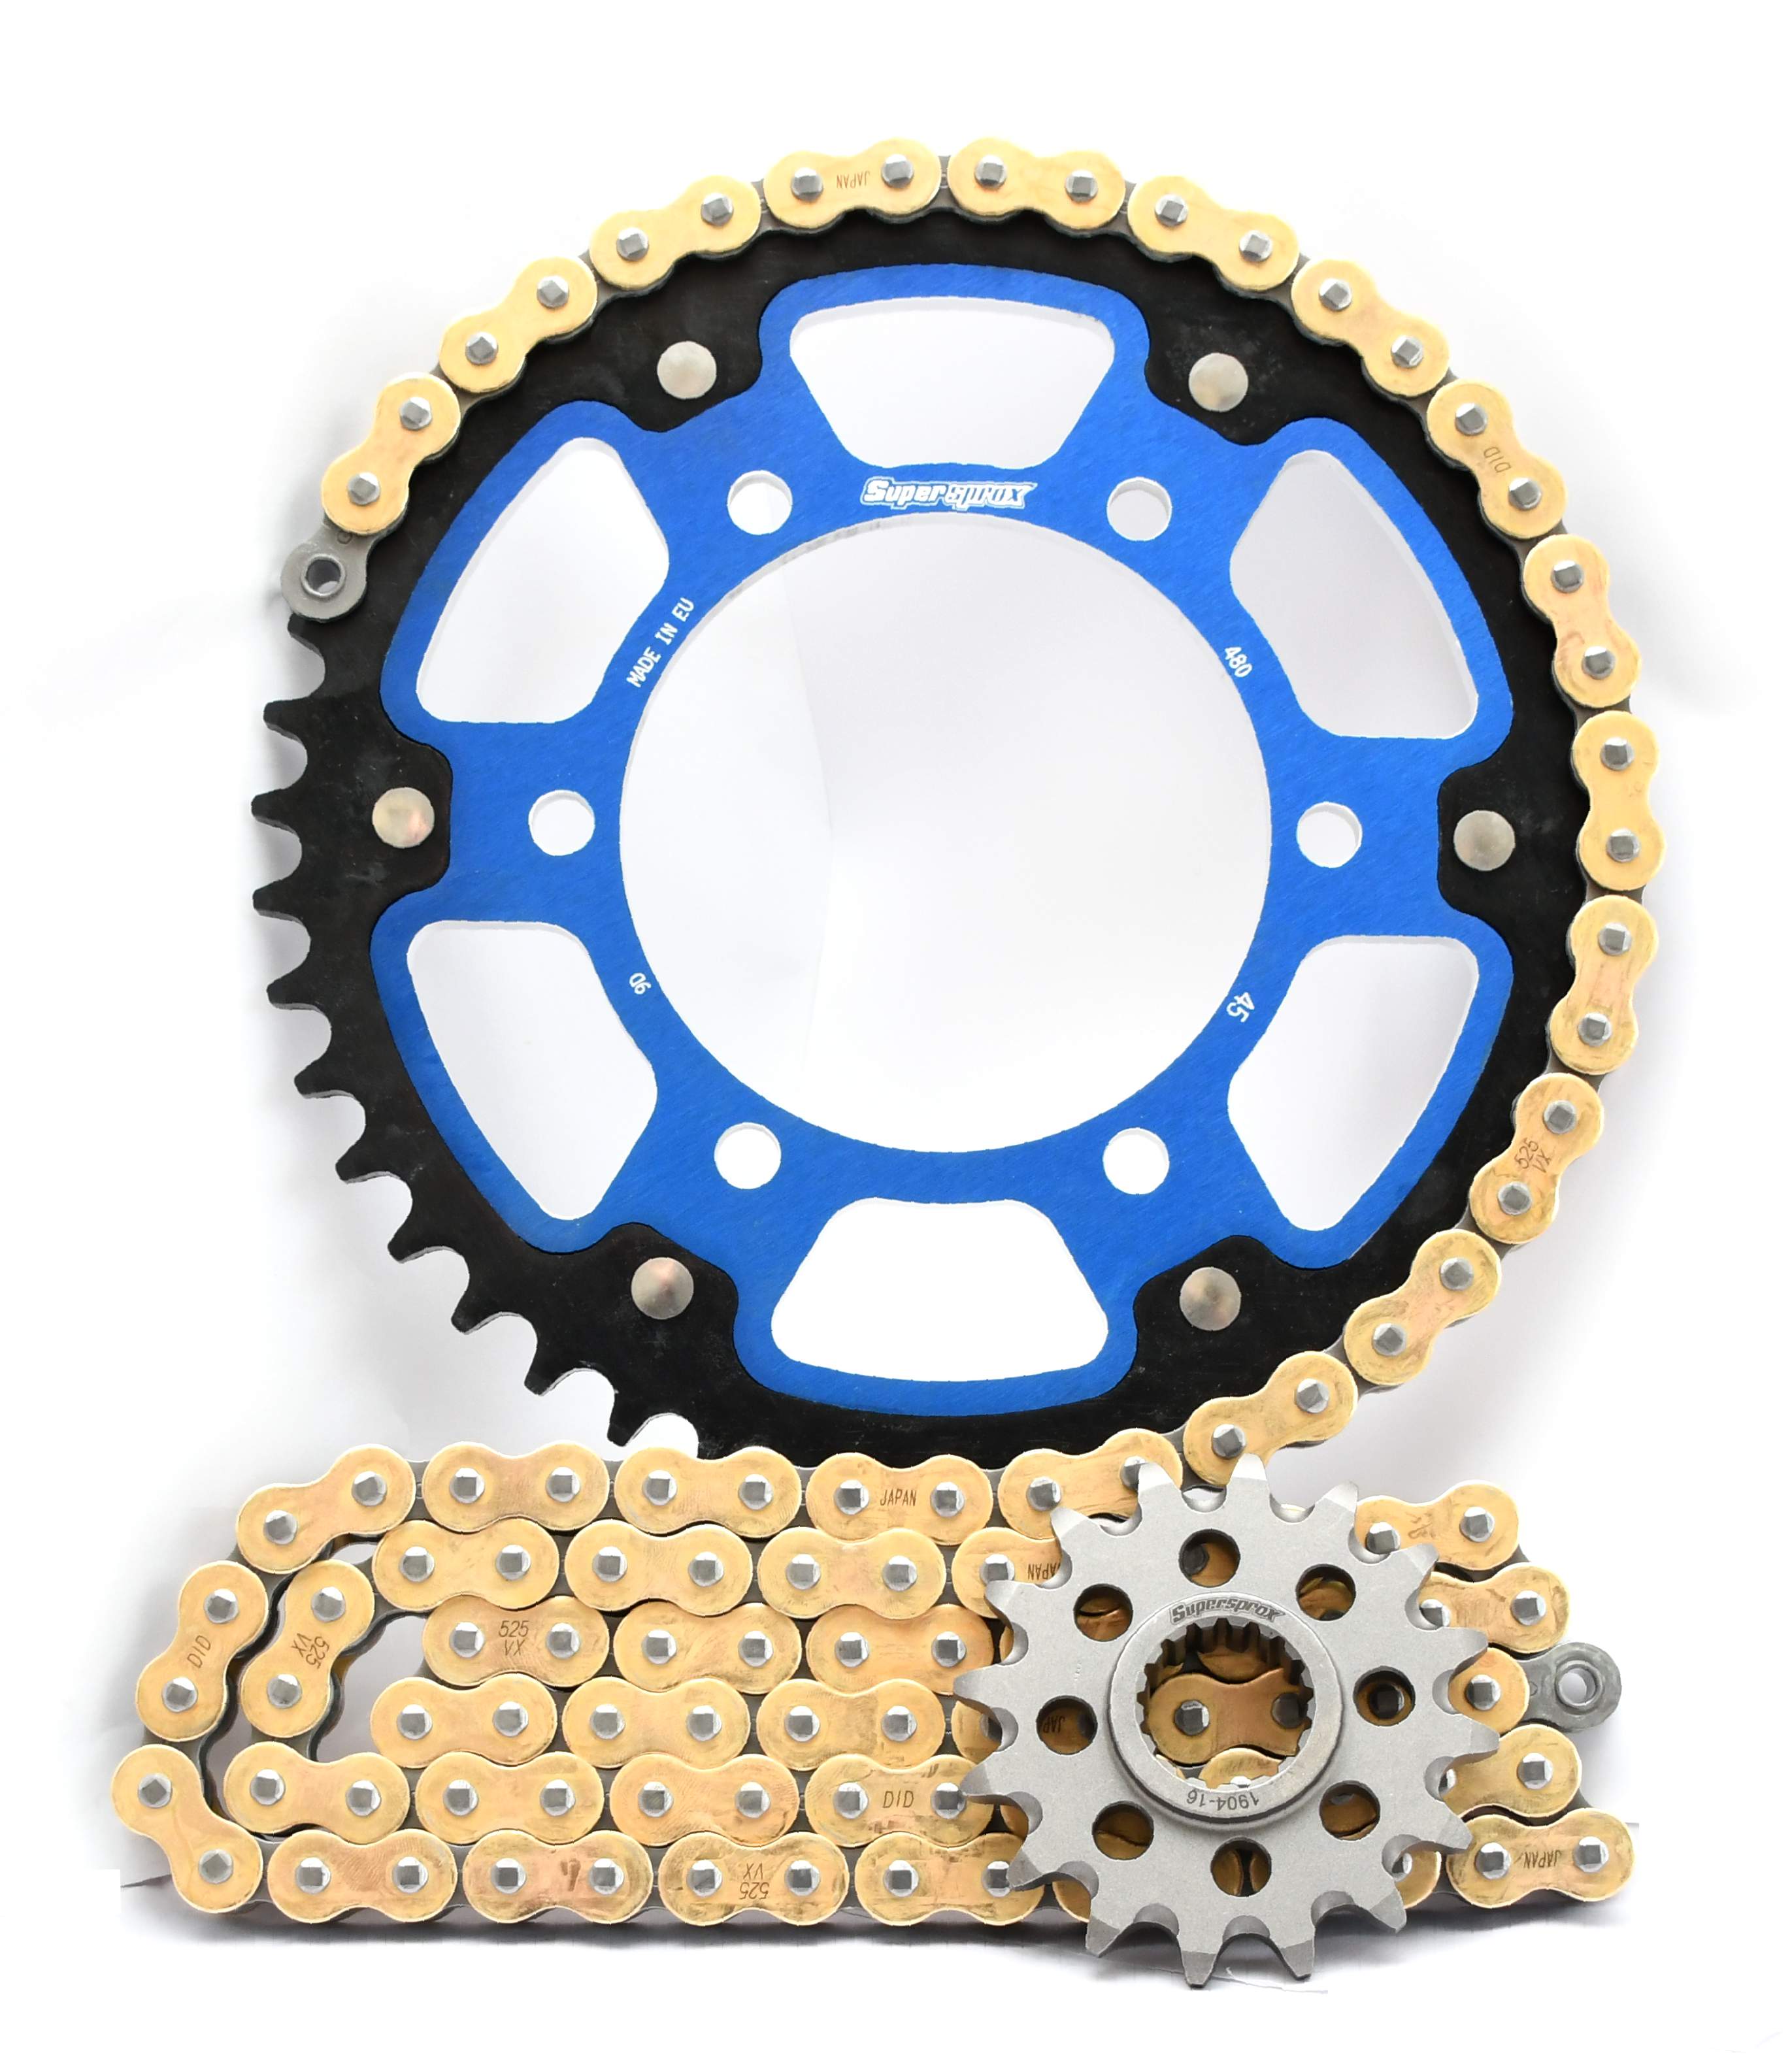 Supersprox Chain & Sprocket Kit for Yamaha YZF R1 2004-2005 - Standard Gearing - 0